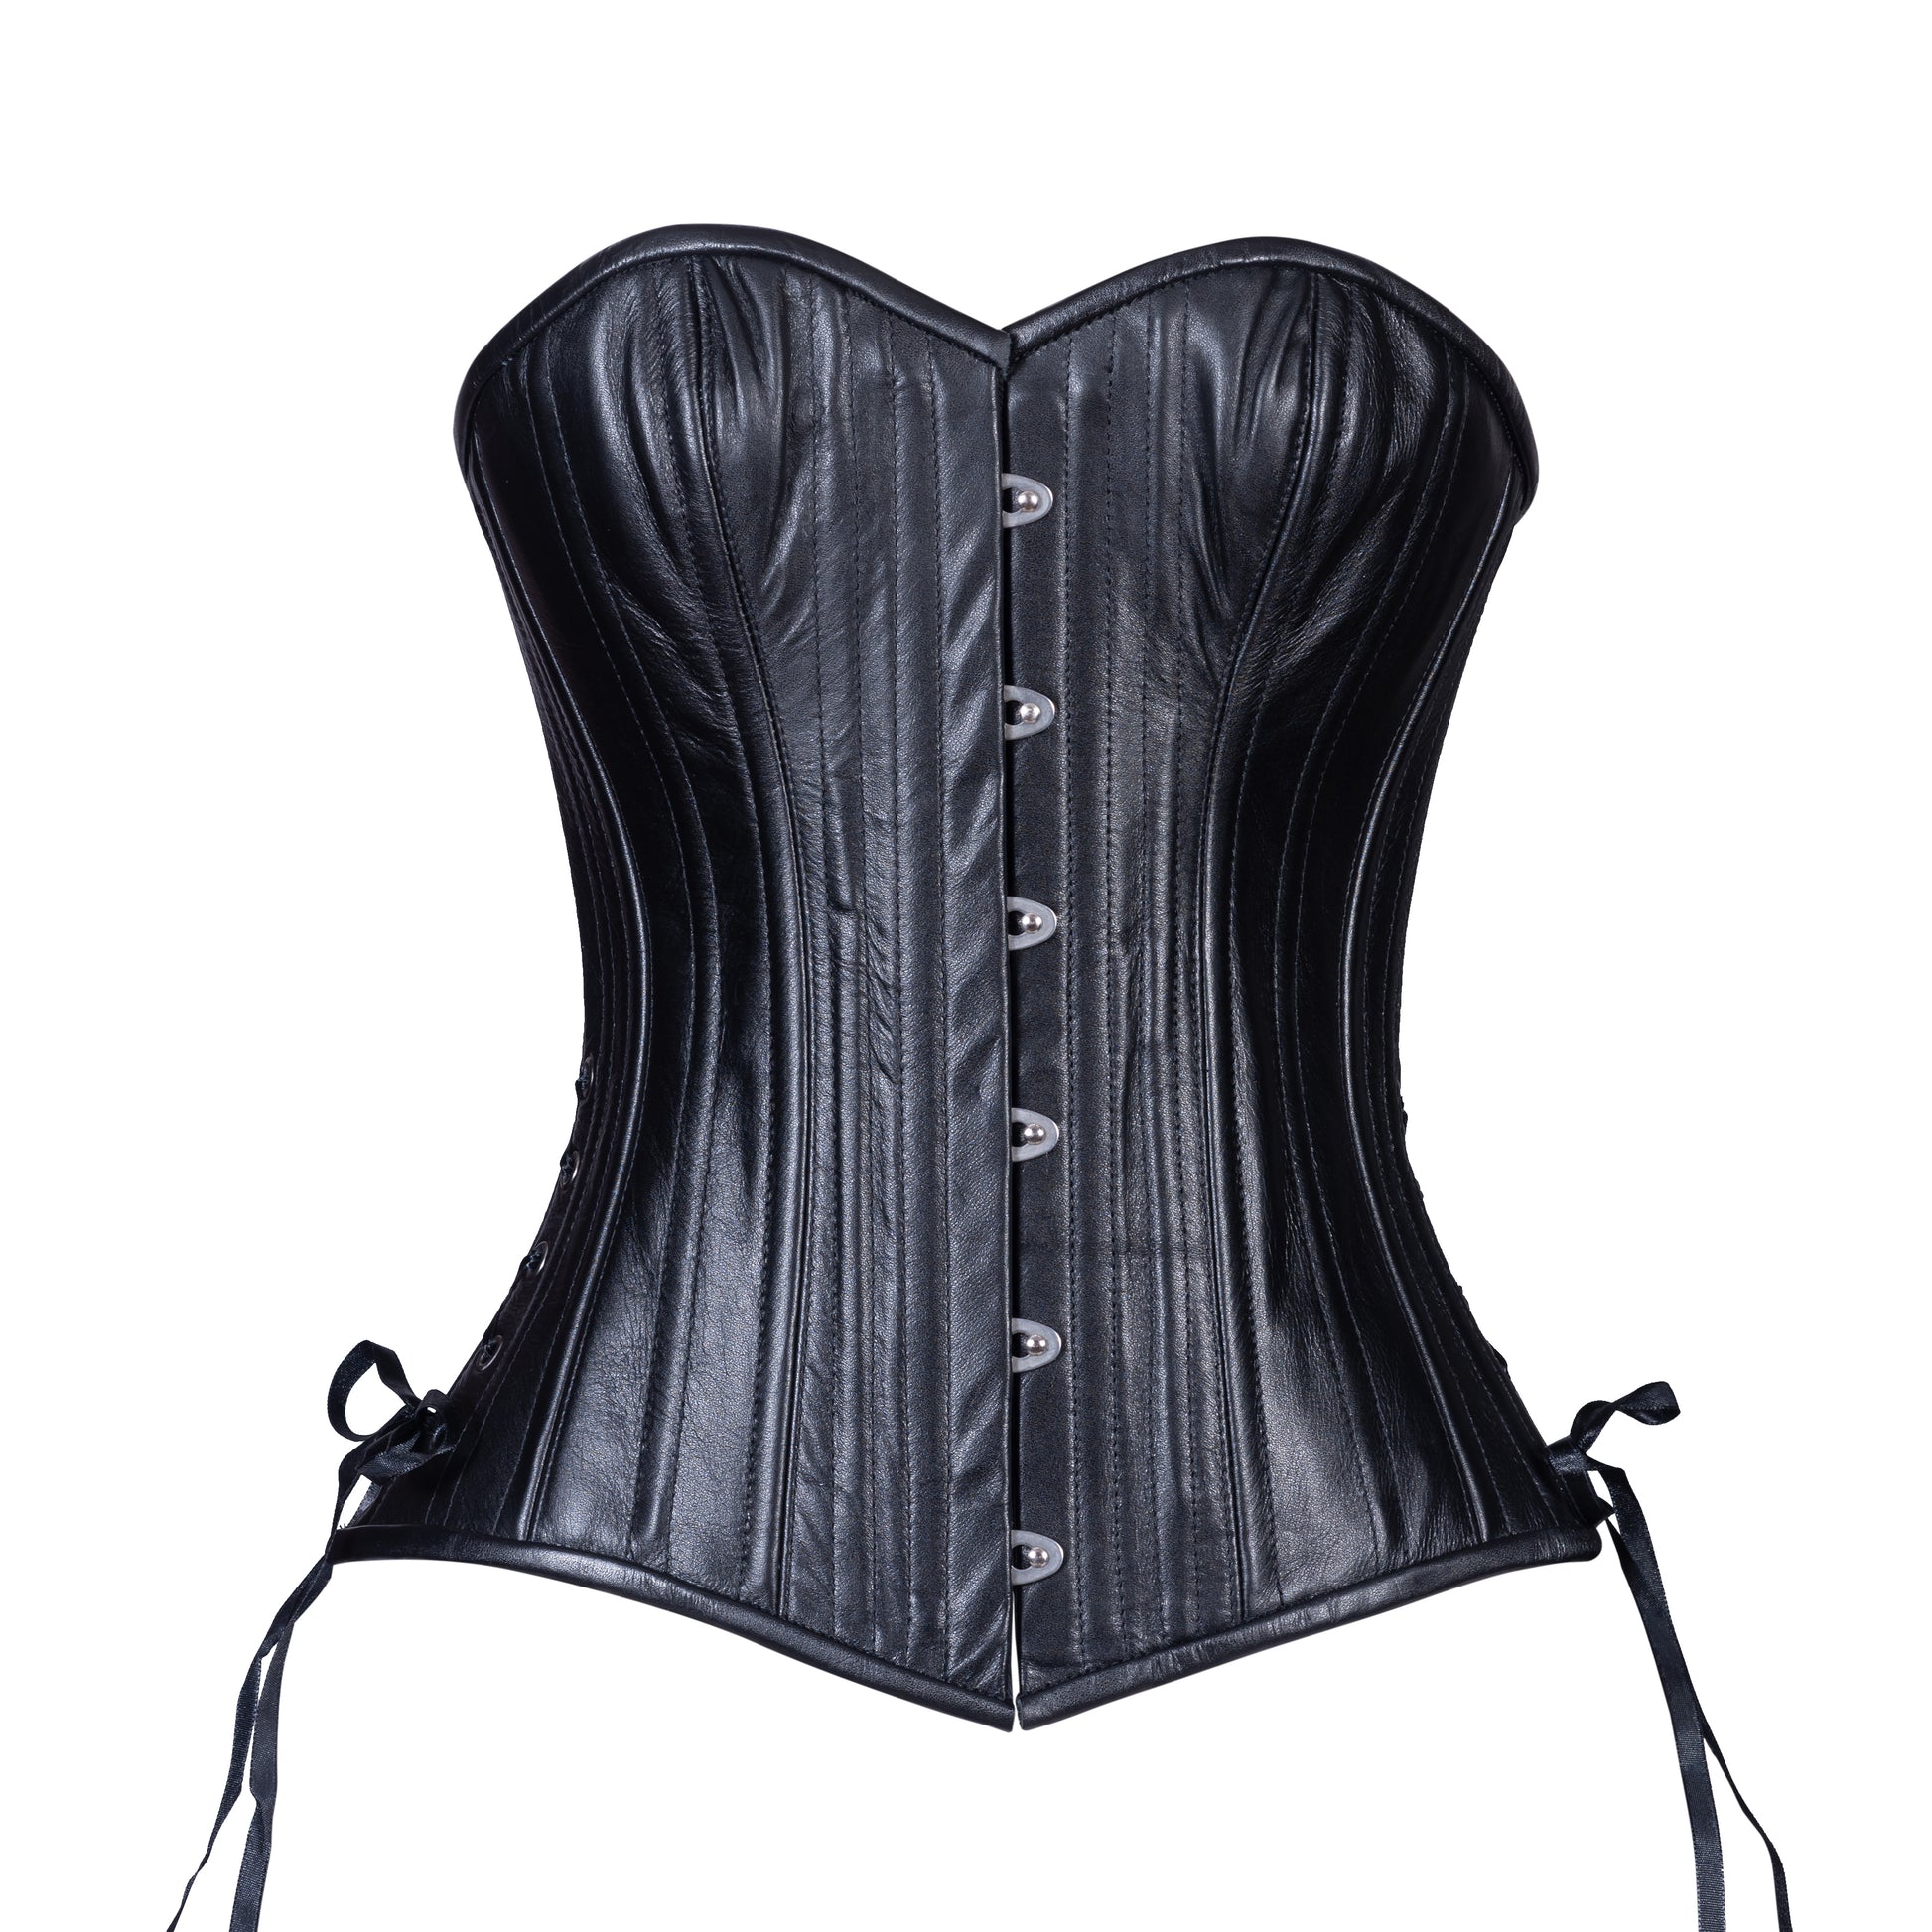 Black Leather Overbust Corset